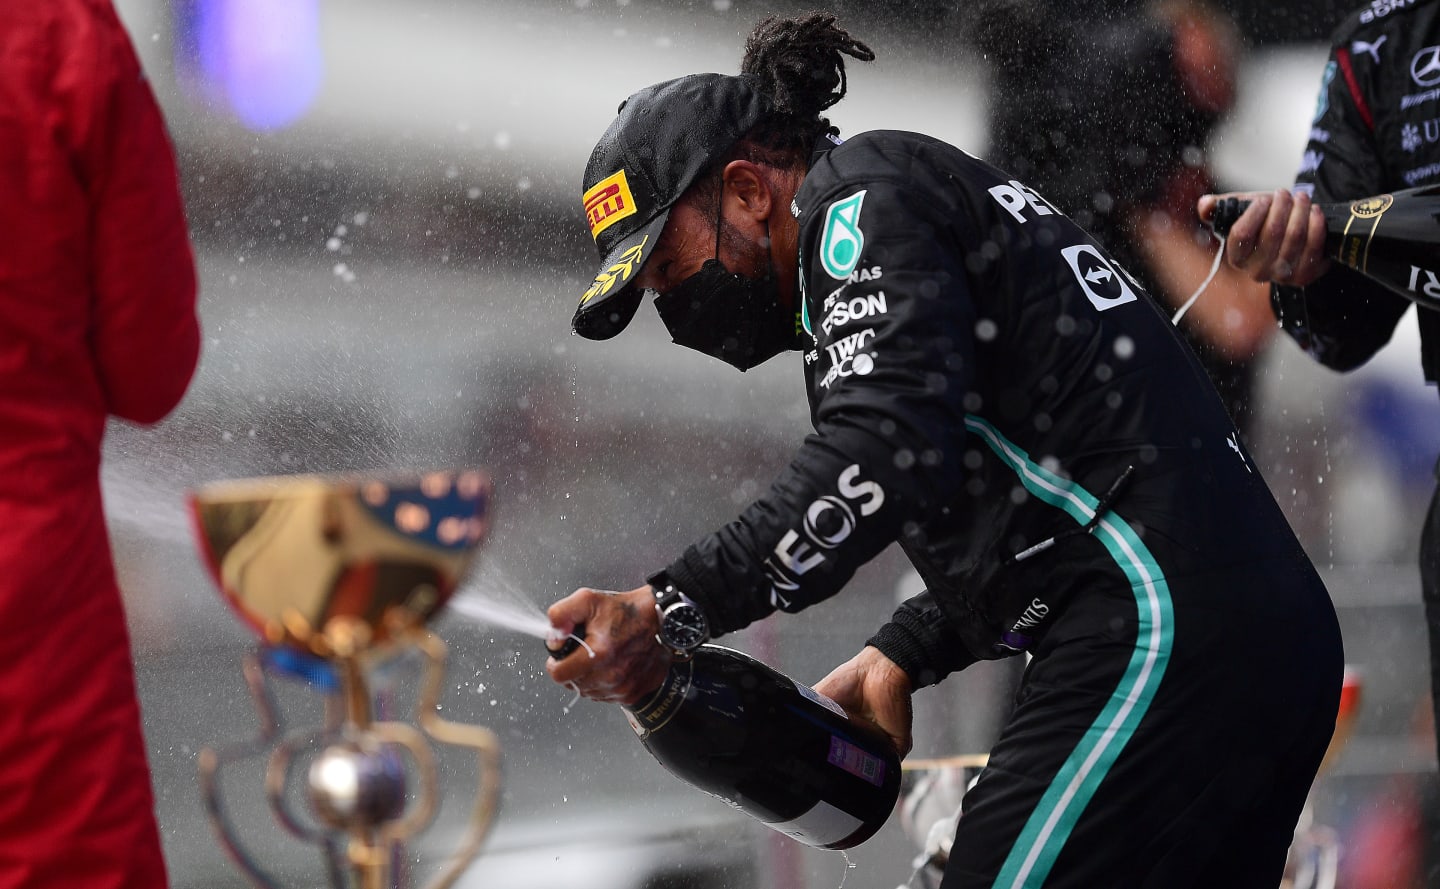 SOCHI, RUSSIA - SEPTEMBER 26: Race winner Lewis Hamilton of Great Britain and Mercedes GP celebrates on the podium during the F1 Grand Prix of Russia at Sochi Autodrom on September 26, 2021 in Sochi, Russia. (Photo by Mario Renzi - Formula 1/Formula 1 via Getty Images)